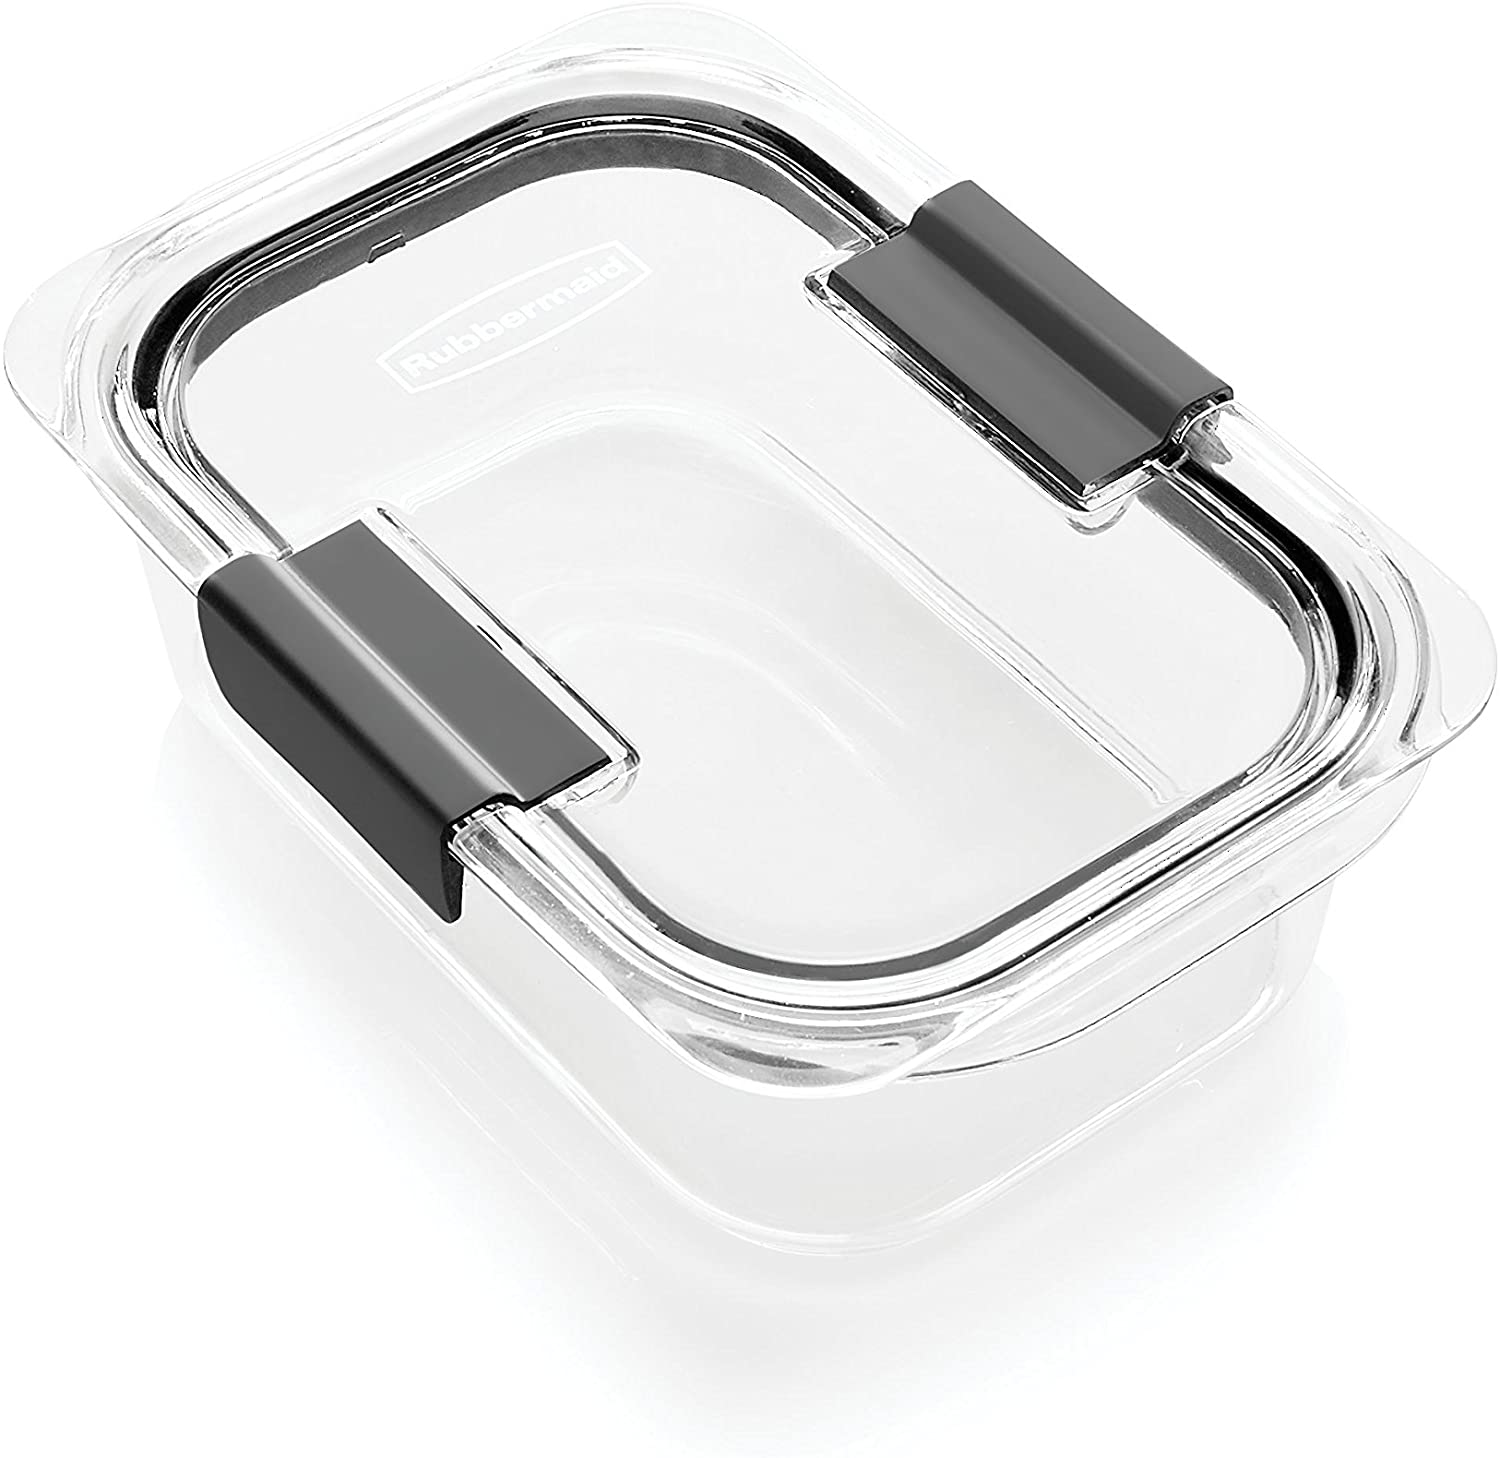 Rubbermaid Brilliance Food Storage Containers, 757 ml - Whole and All